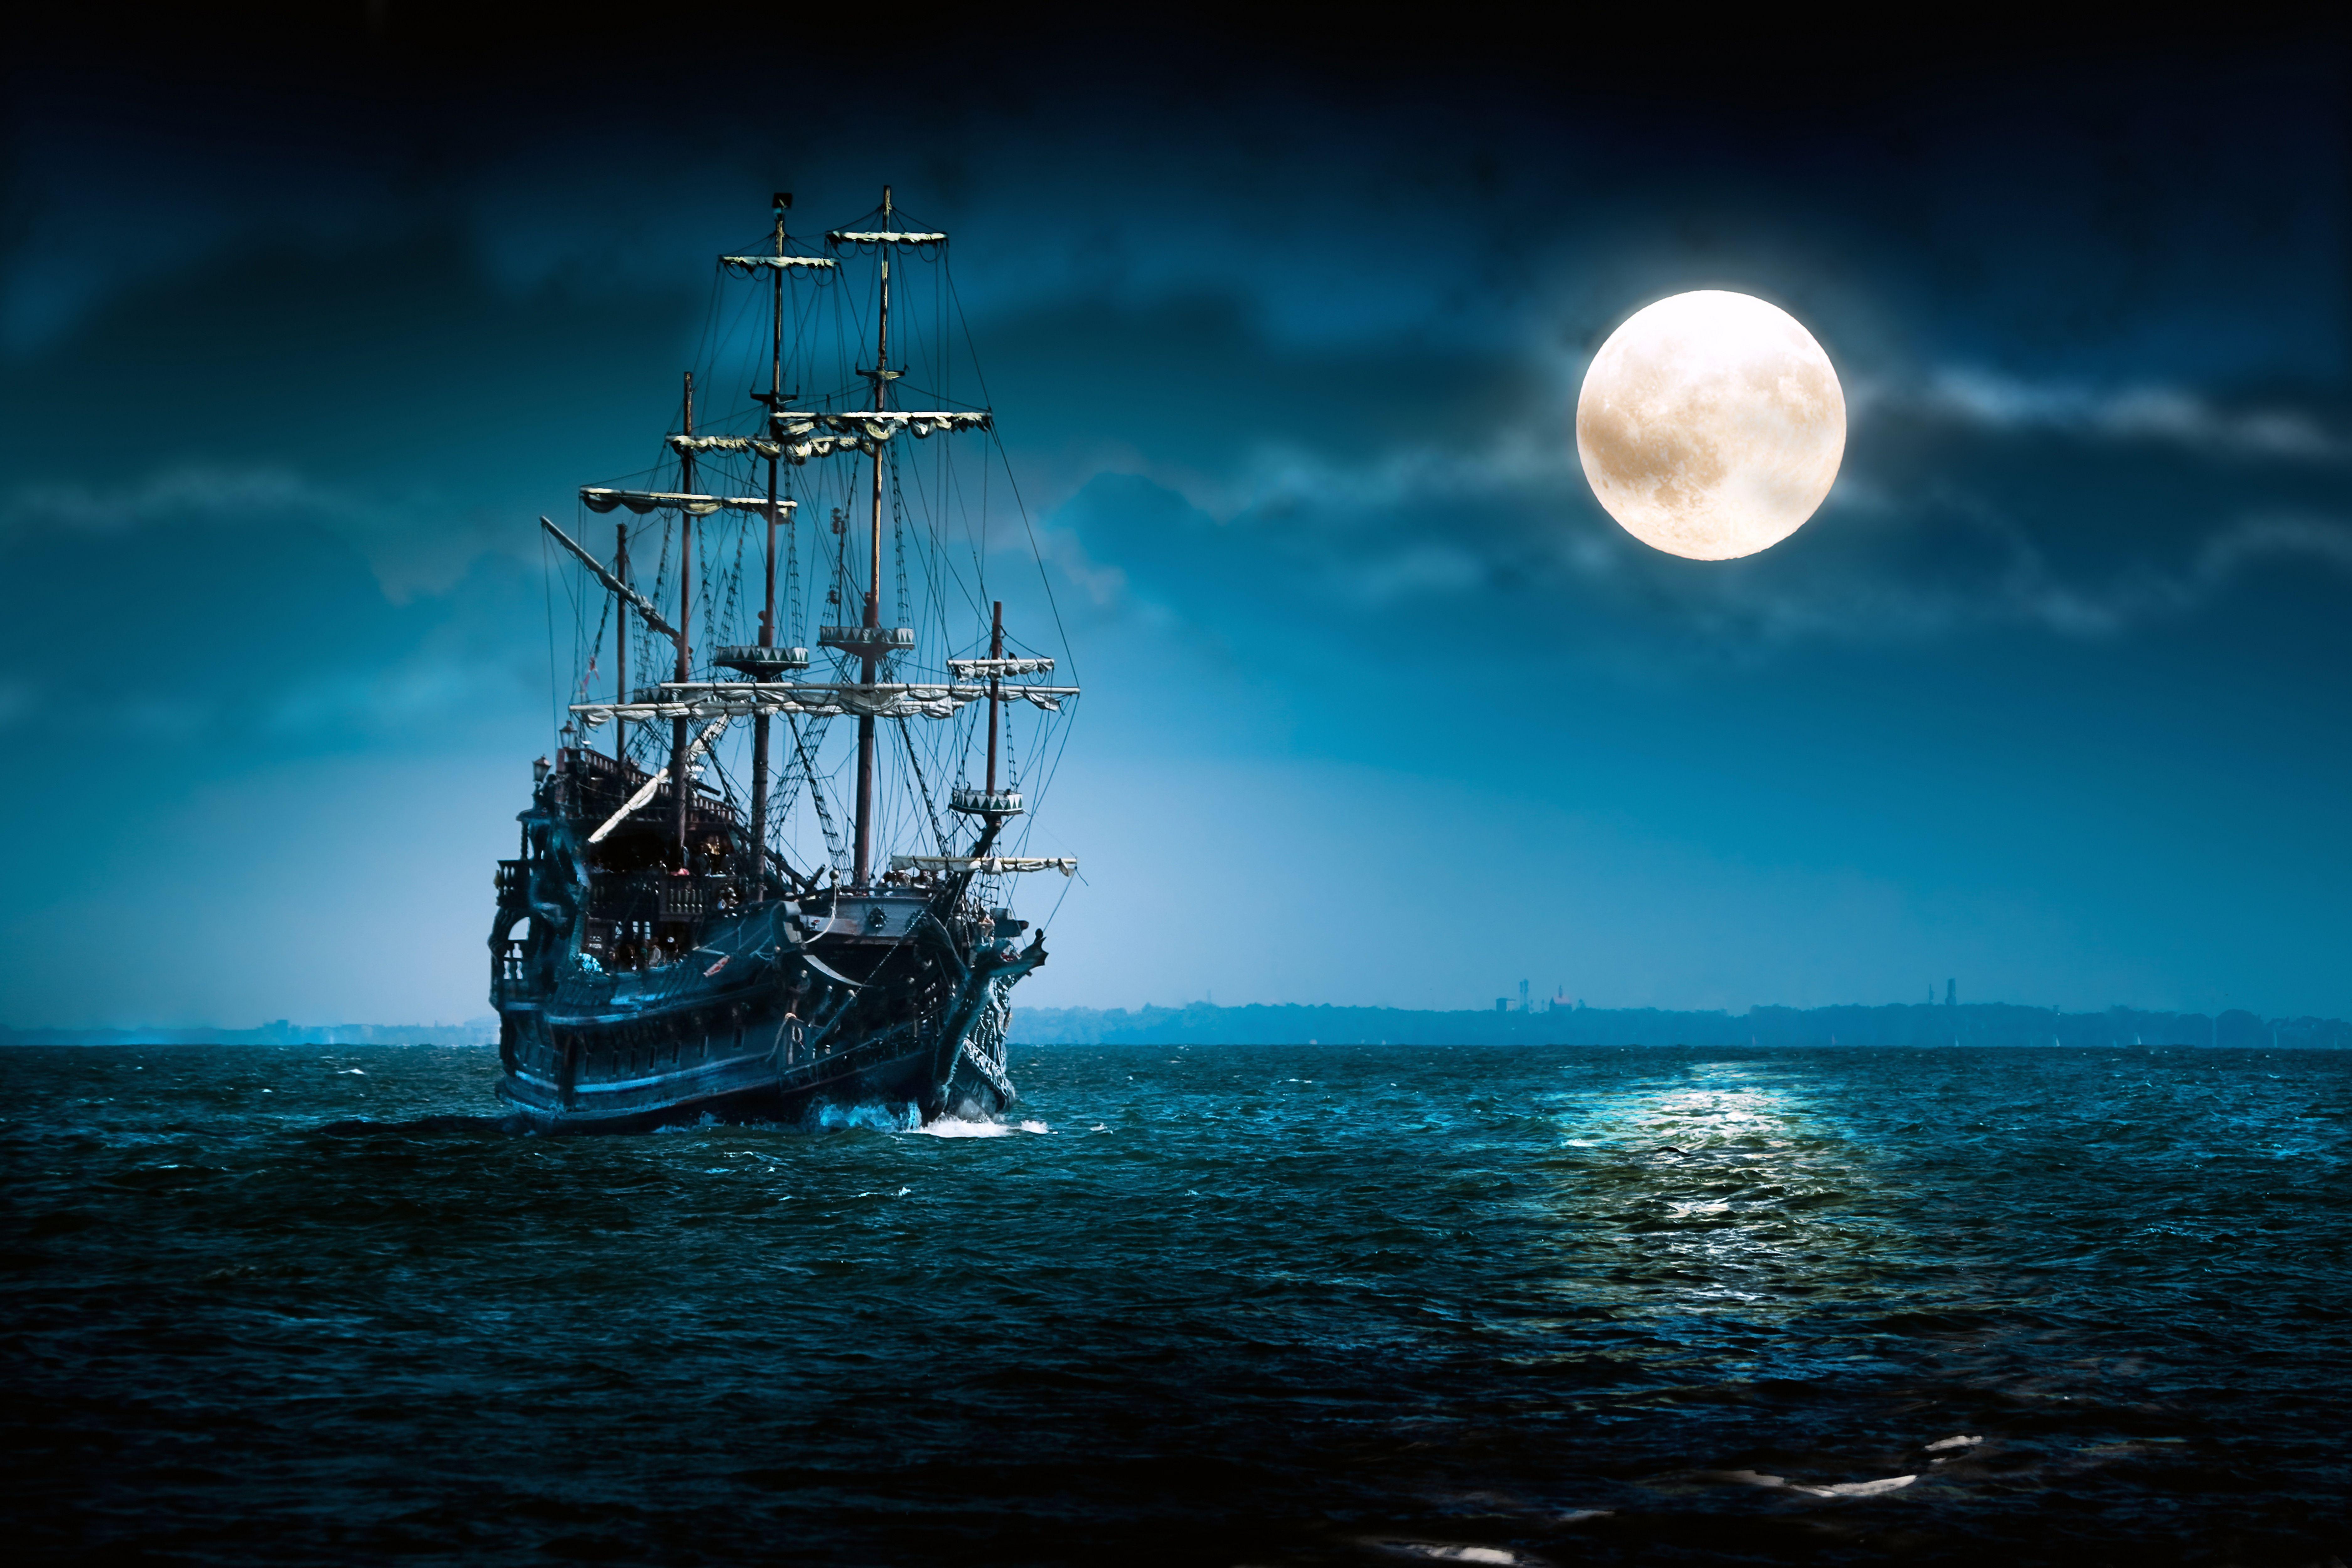 Ship On The Night Sea Wallpaper. Places to Visit